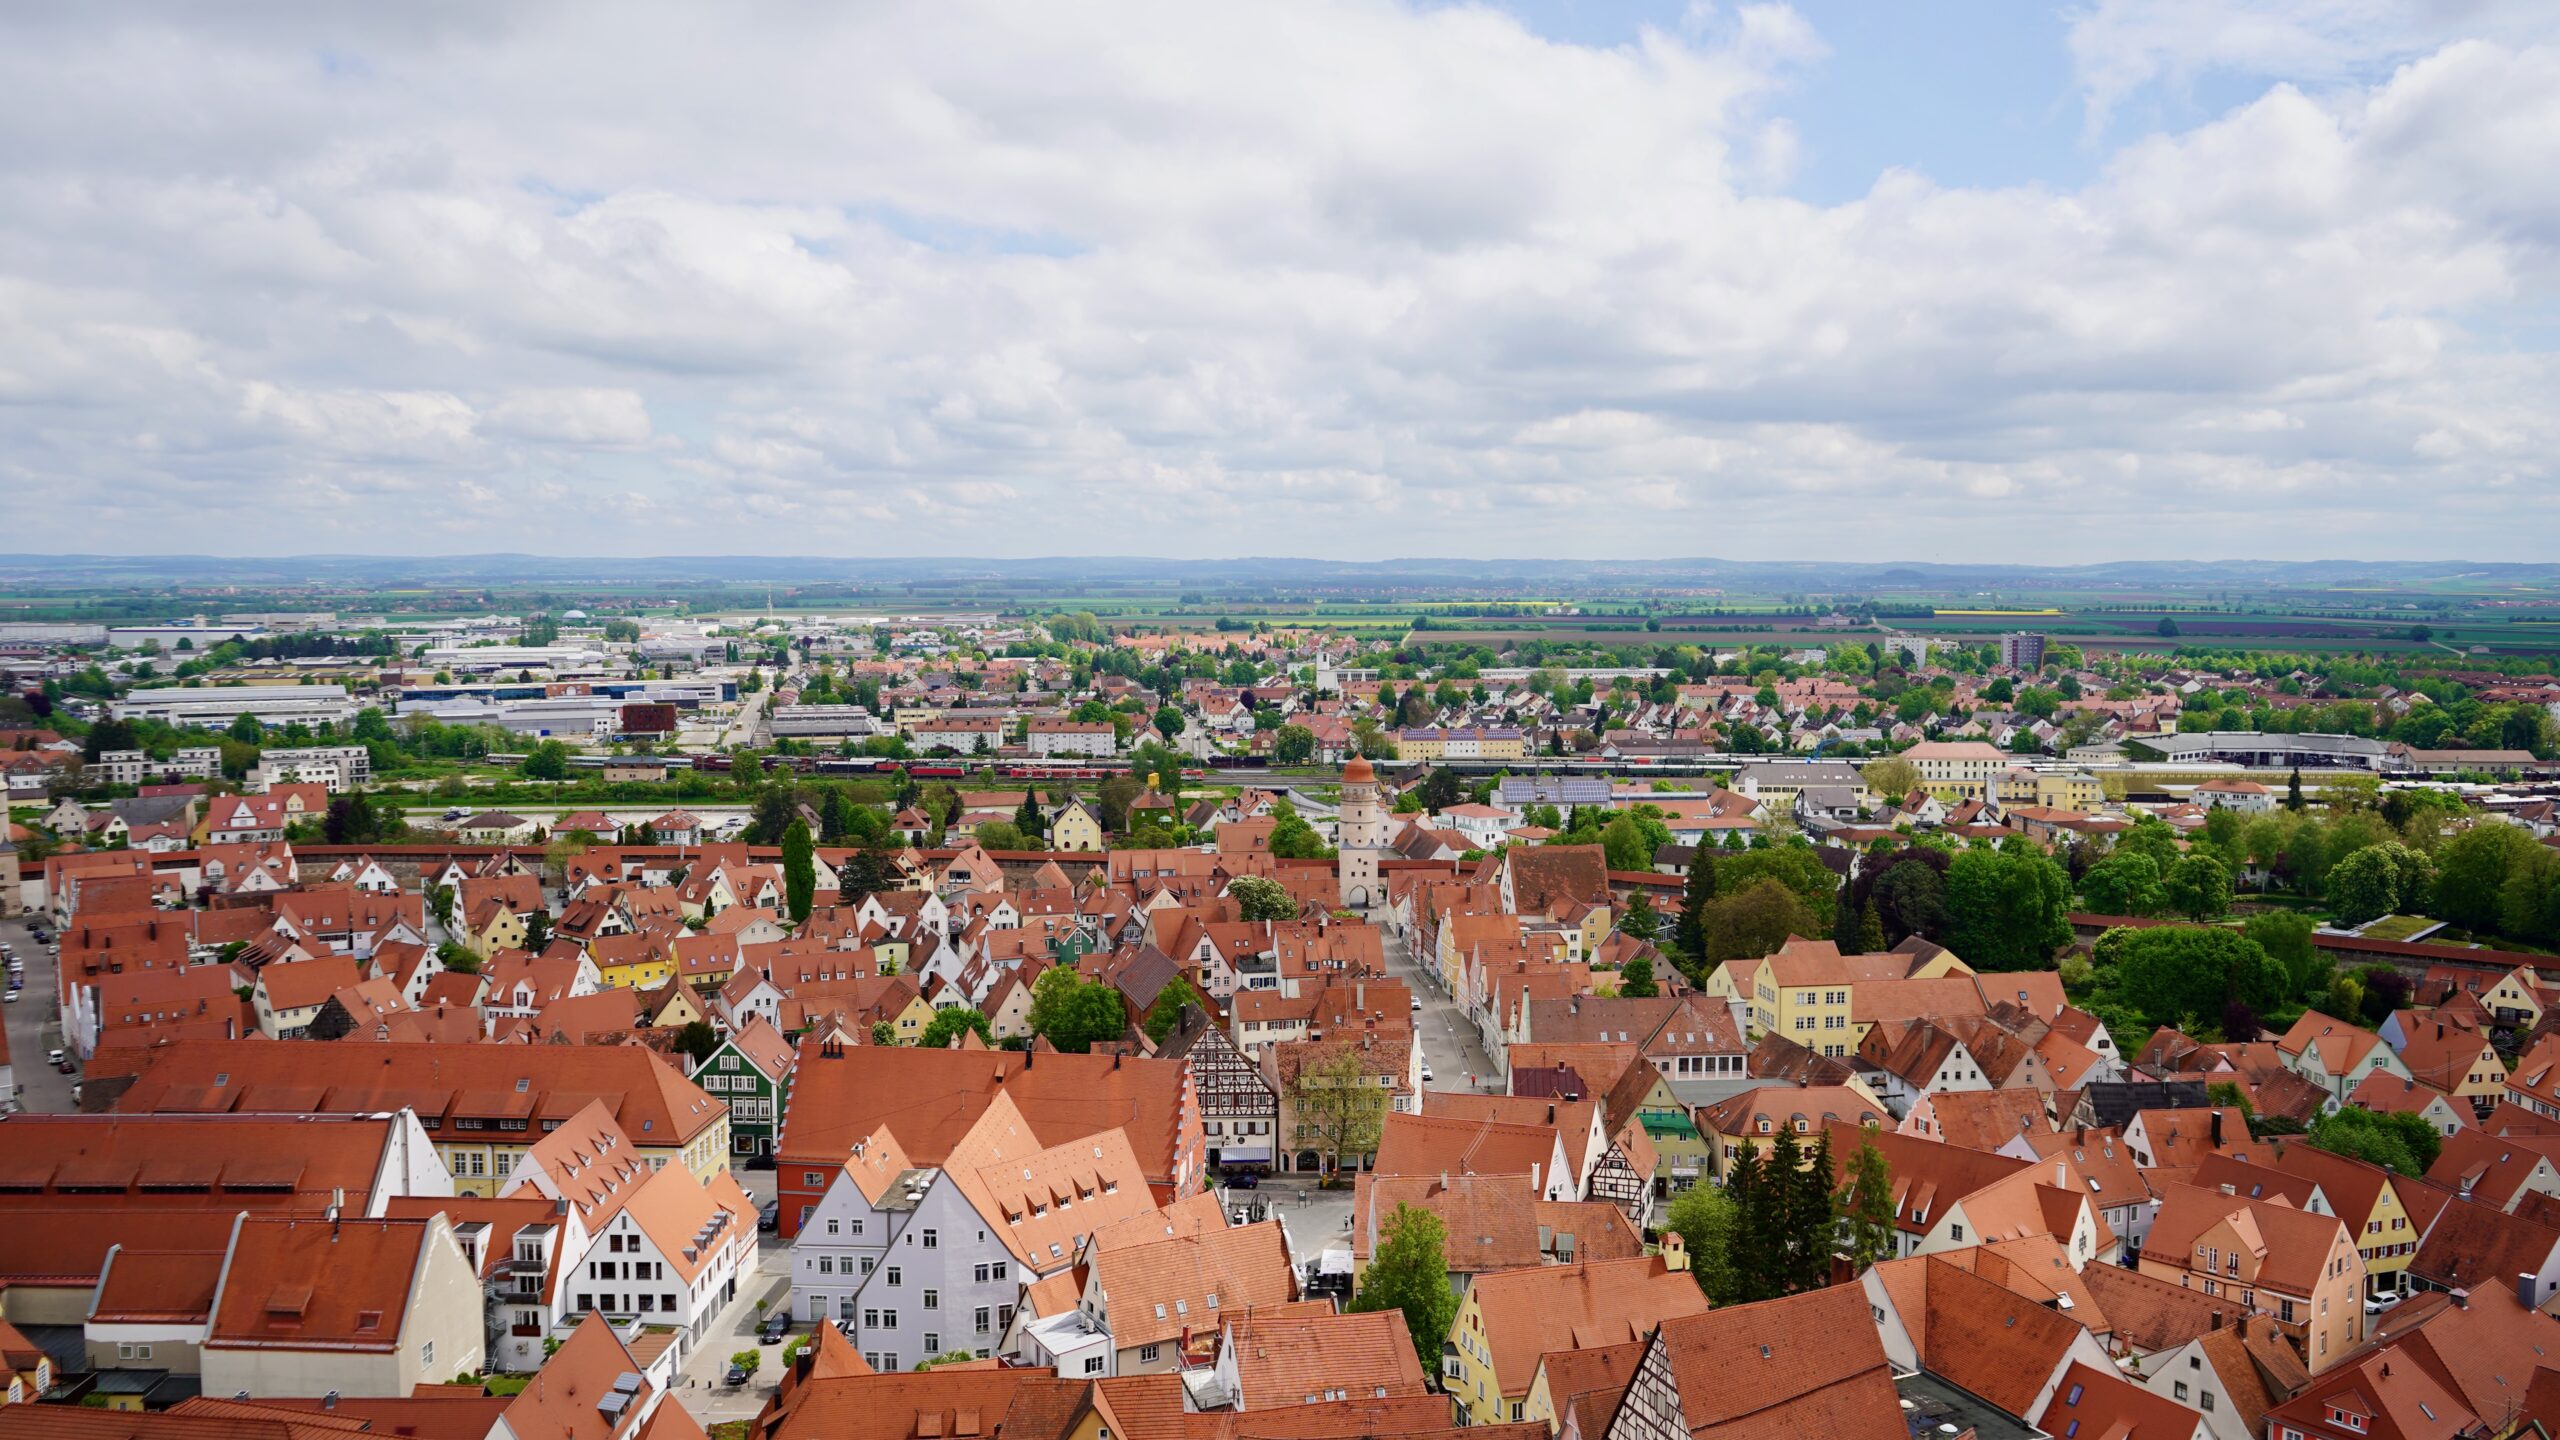 a high view from the church tower over the town of nordlingen germany